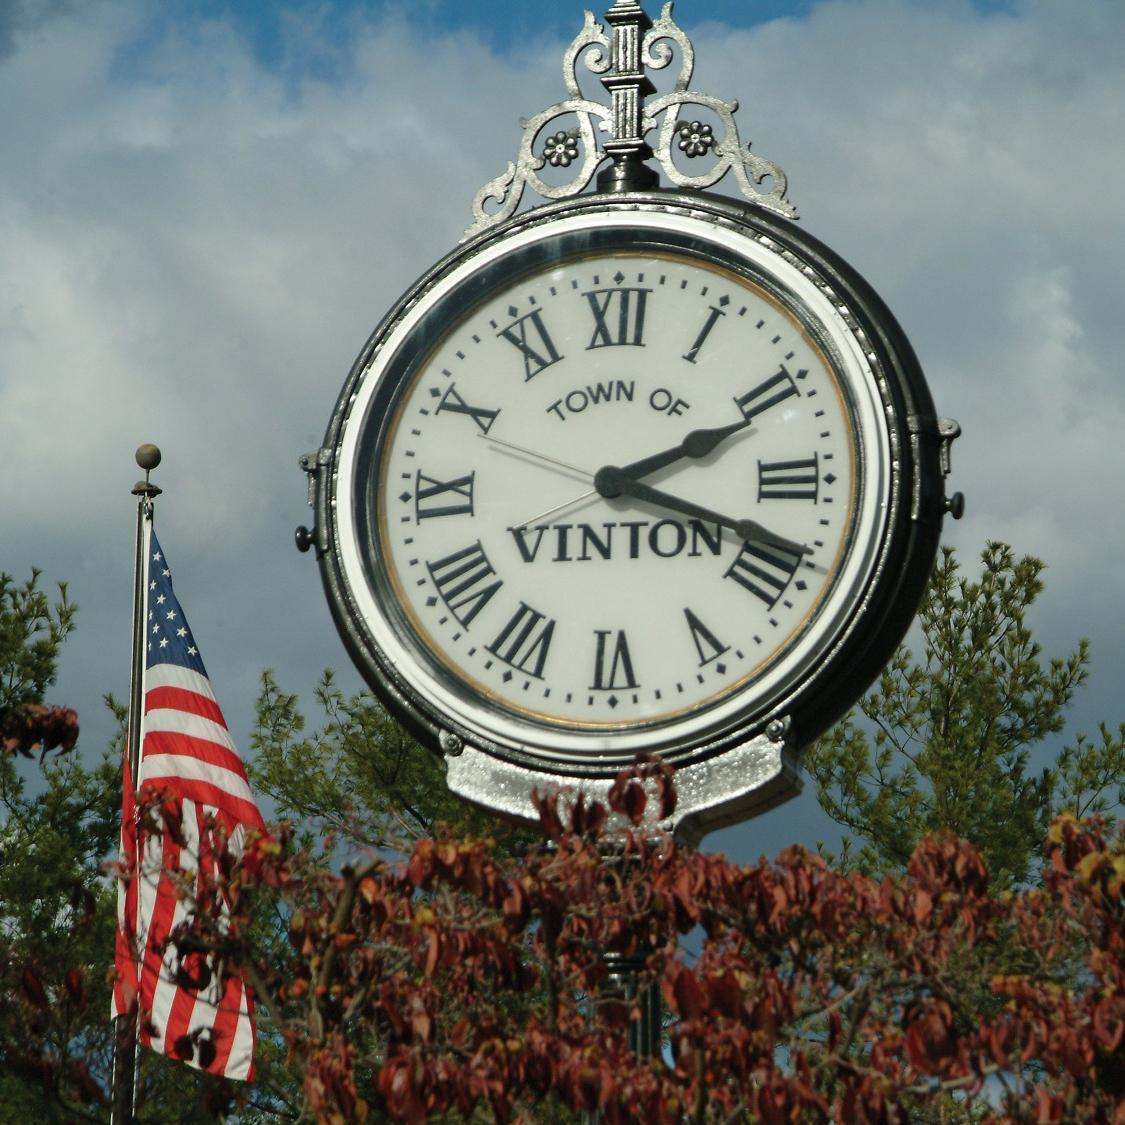 Chartered March 17, 1884, Town of Vinton, Virginia: The Best Kept Secret in the Roanoke Valley!